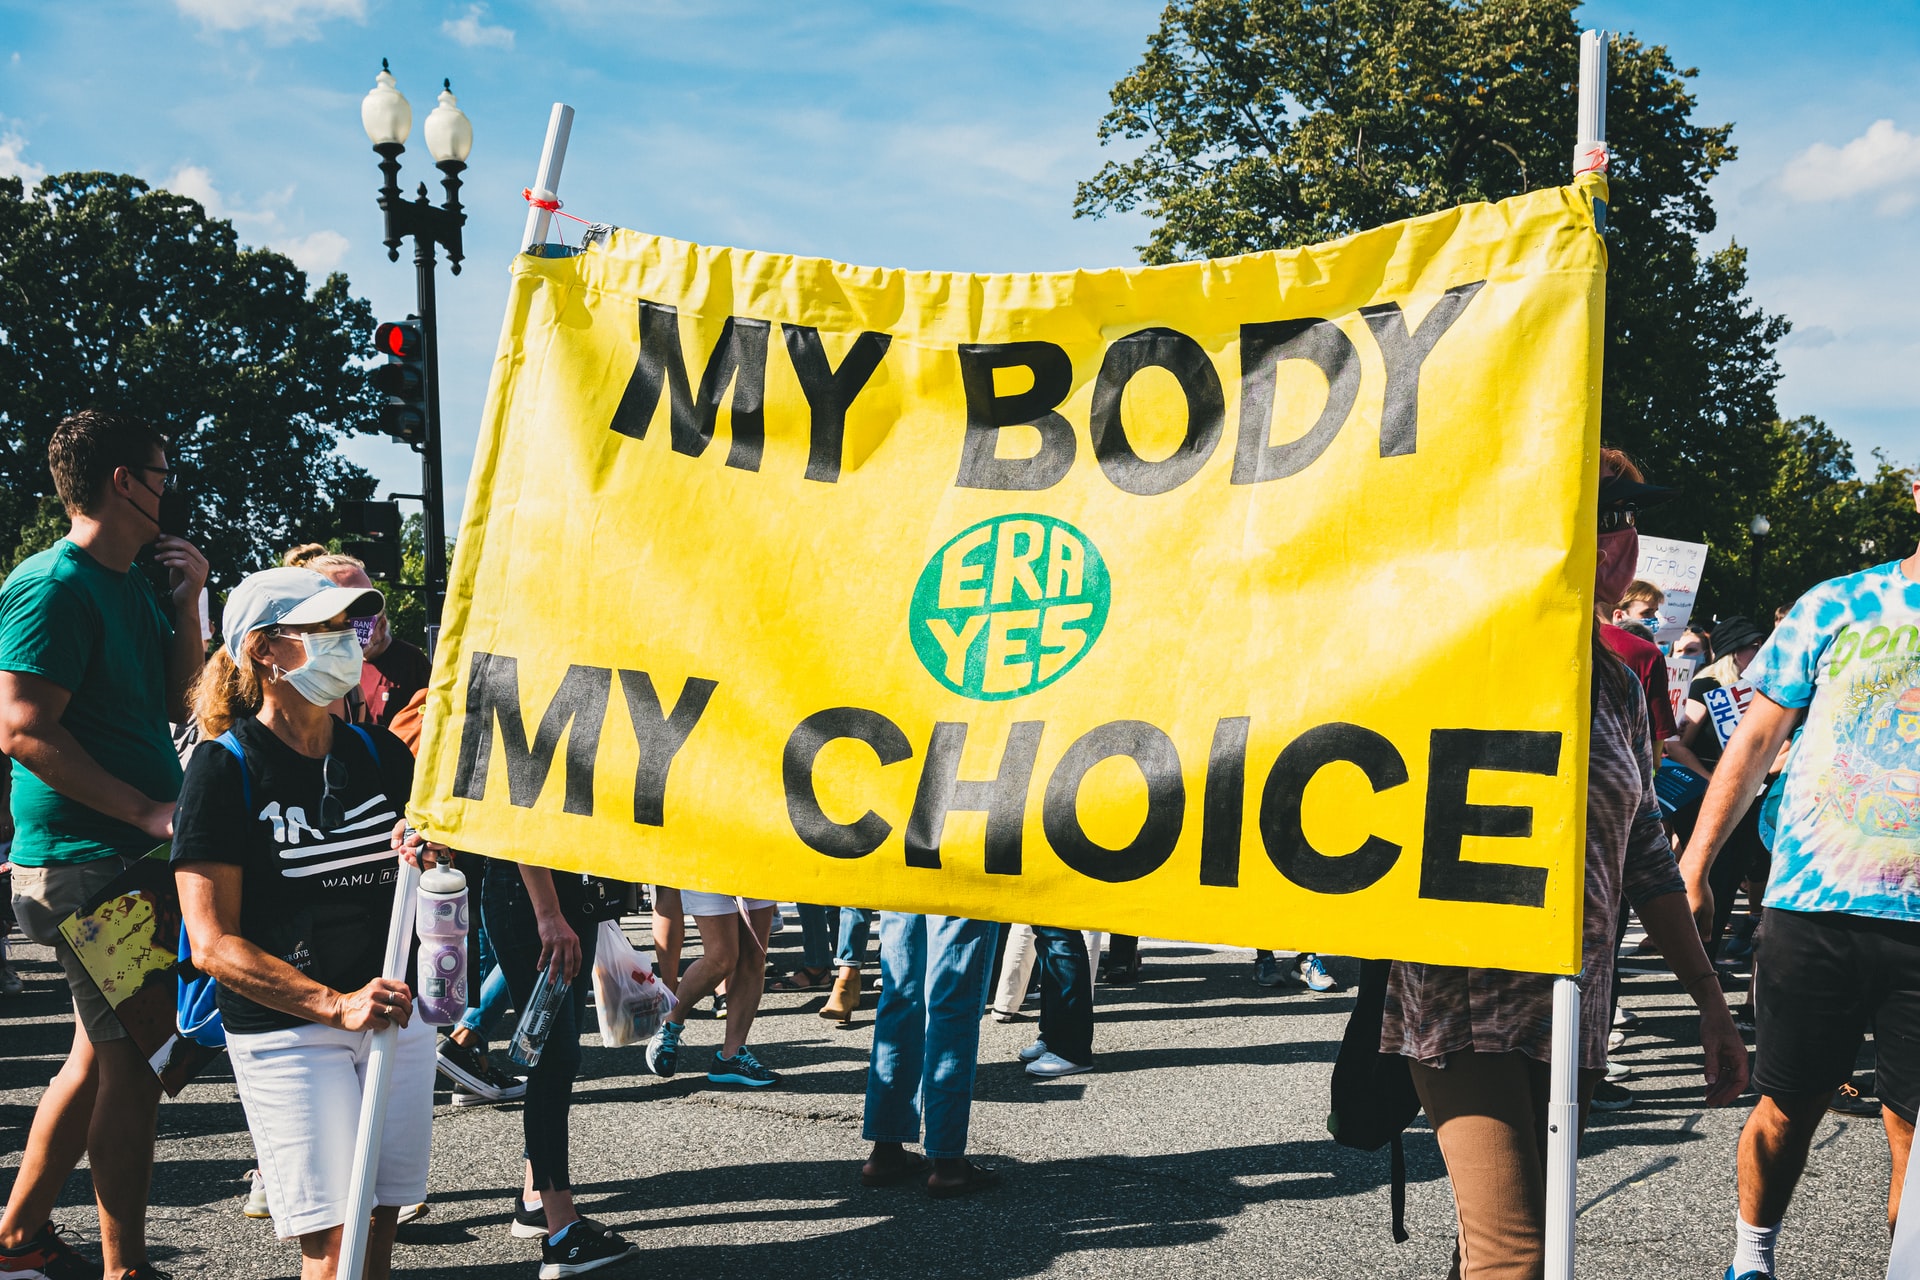 Protest sign read as "My body my choice"